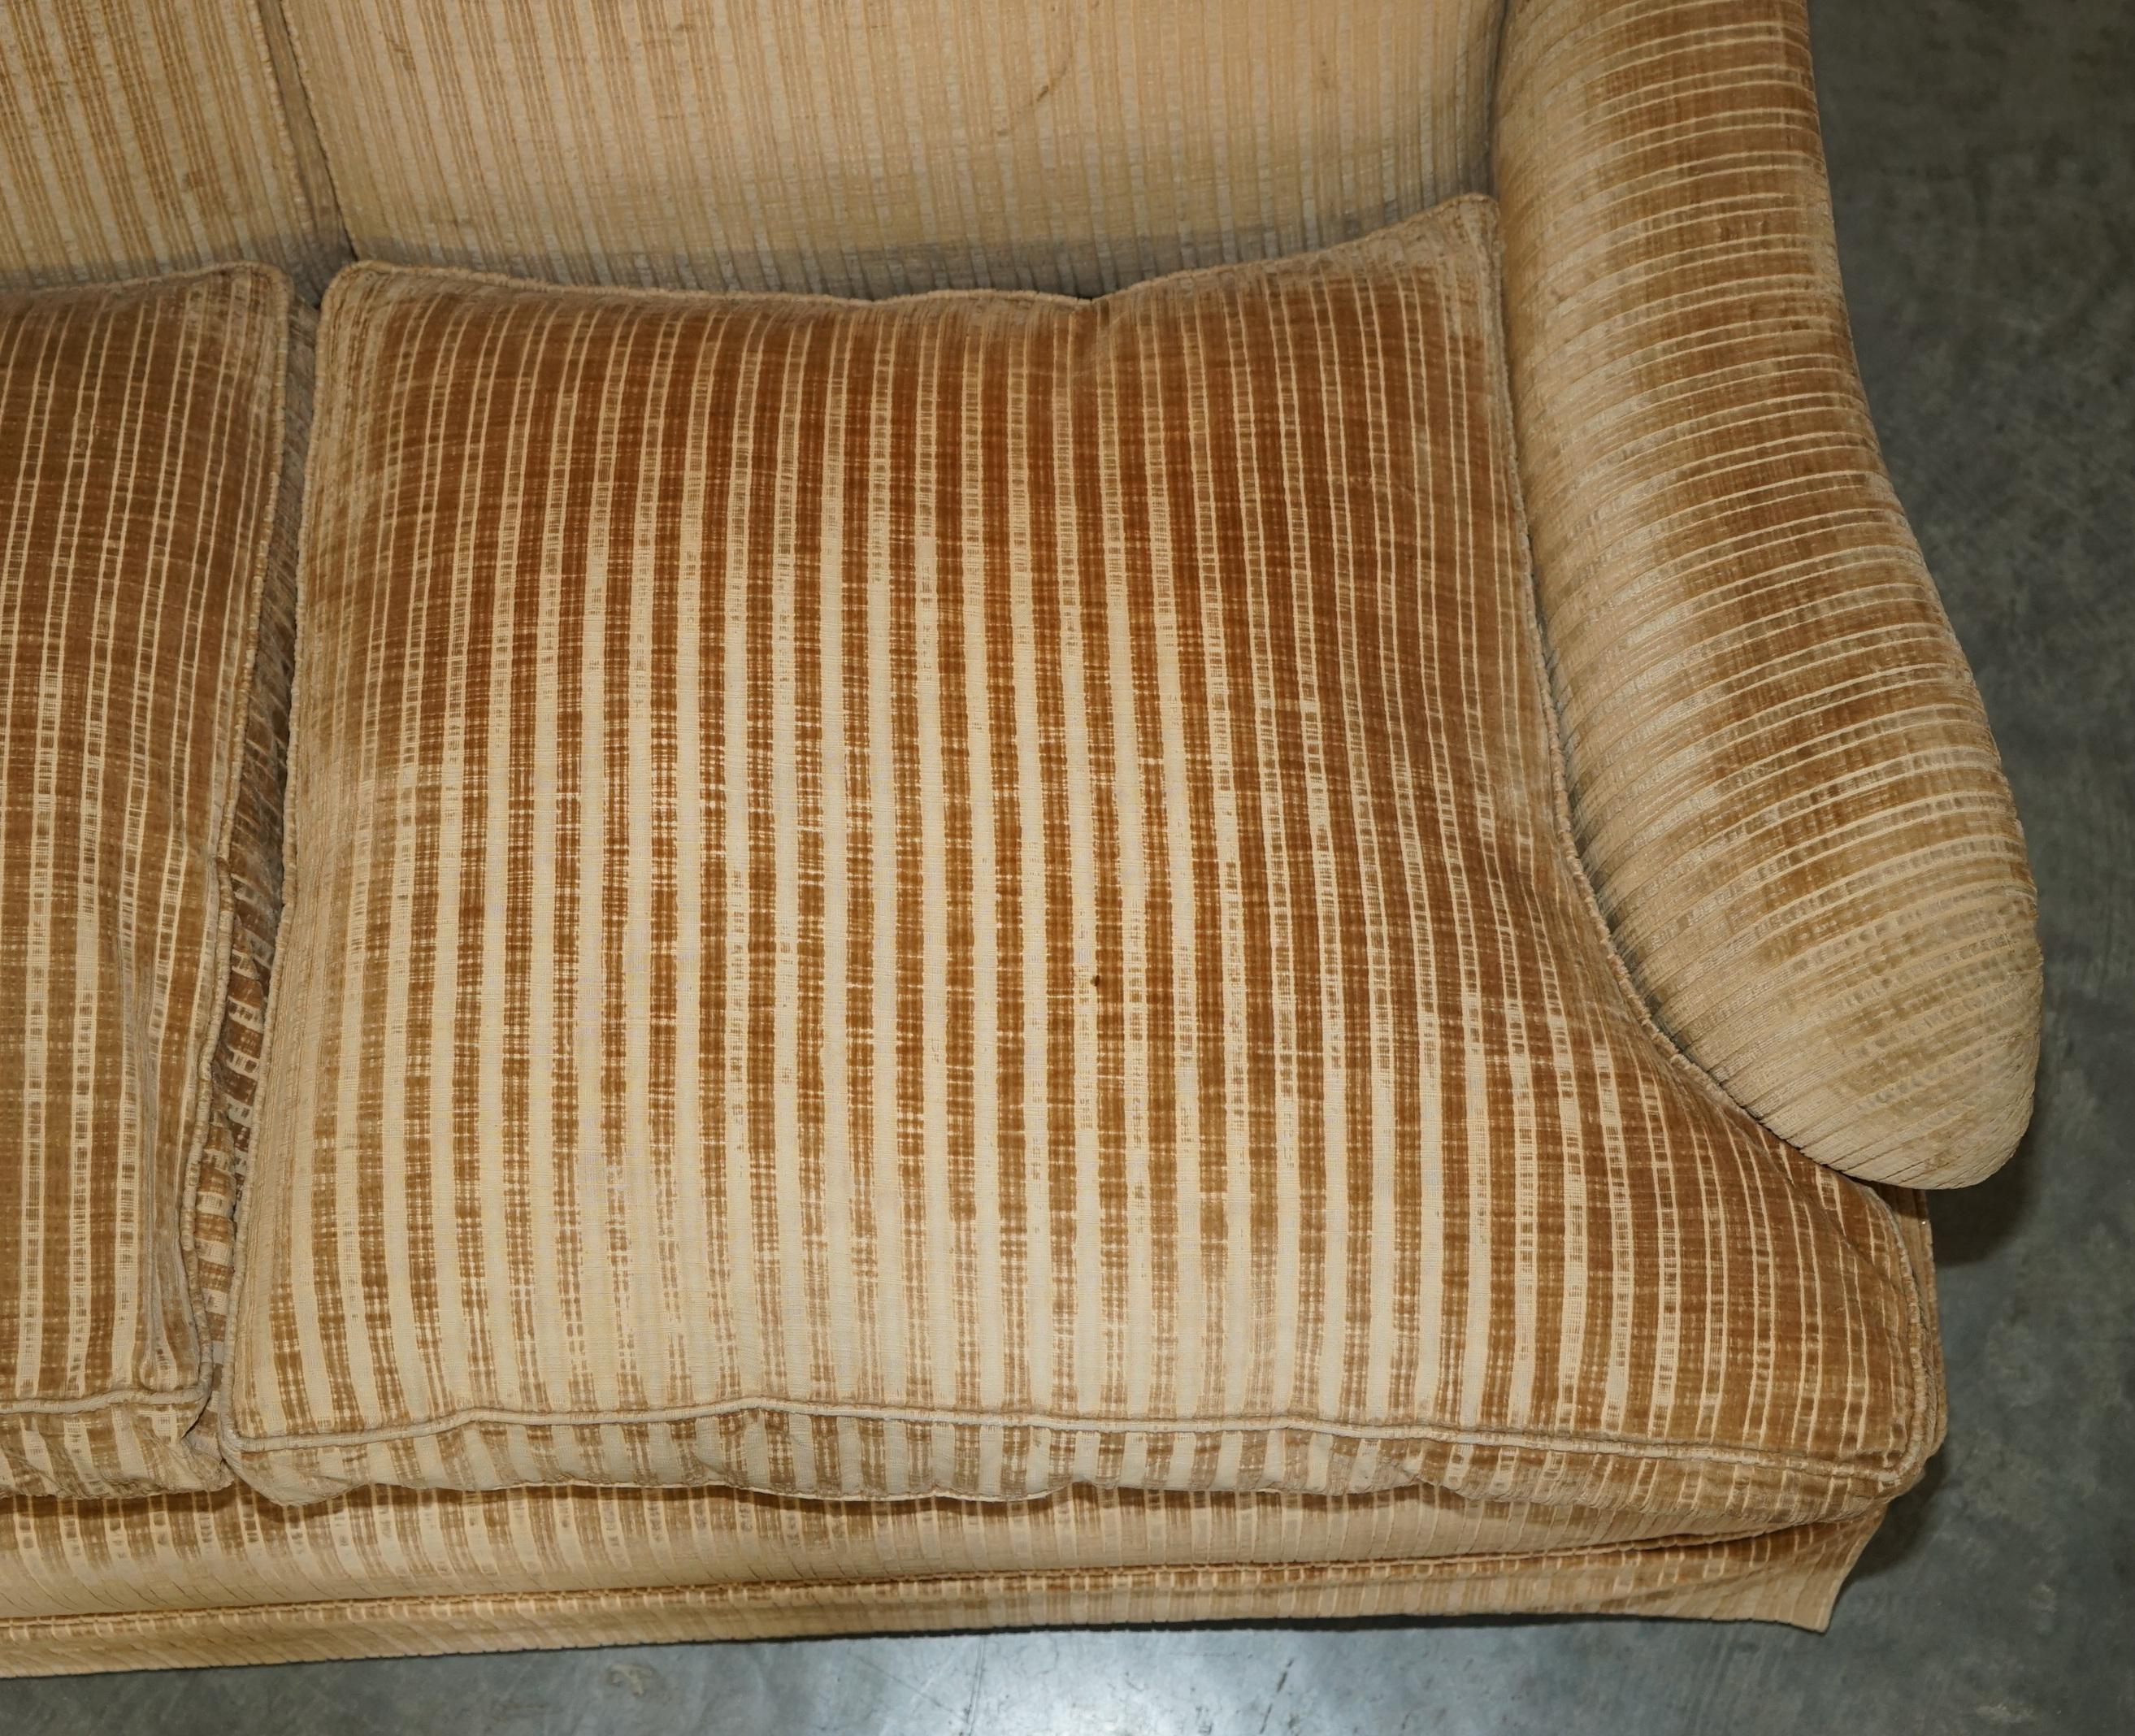 LOVELY HOWARD & SON'S / CHAIRS LTD ZWEI SEAT SOFA FEATHER FILLED SEAT CUSHIONs (Polster) im Angebot